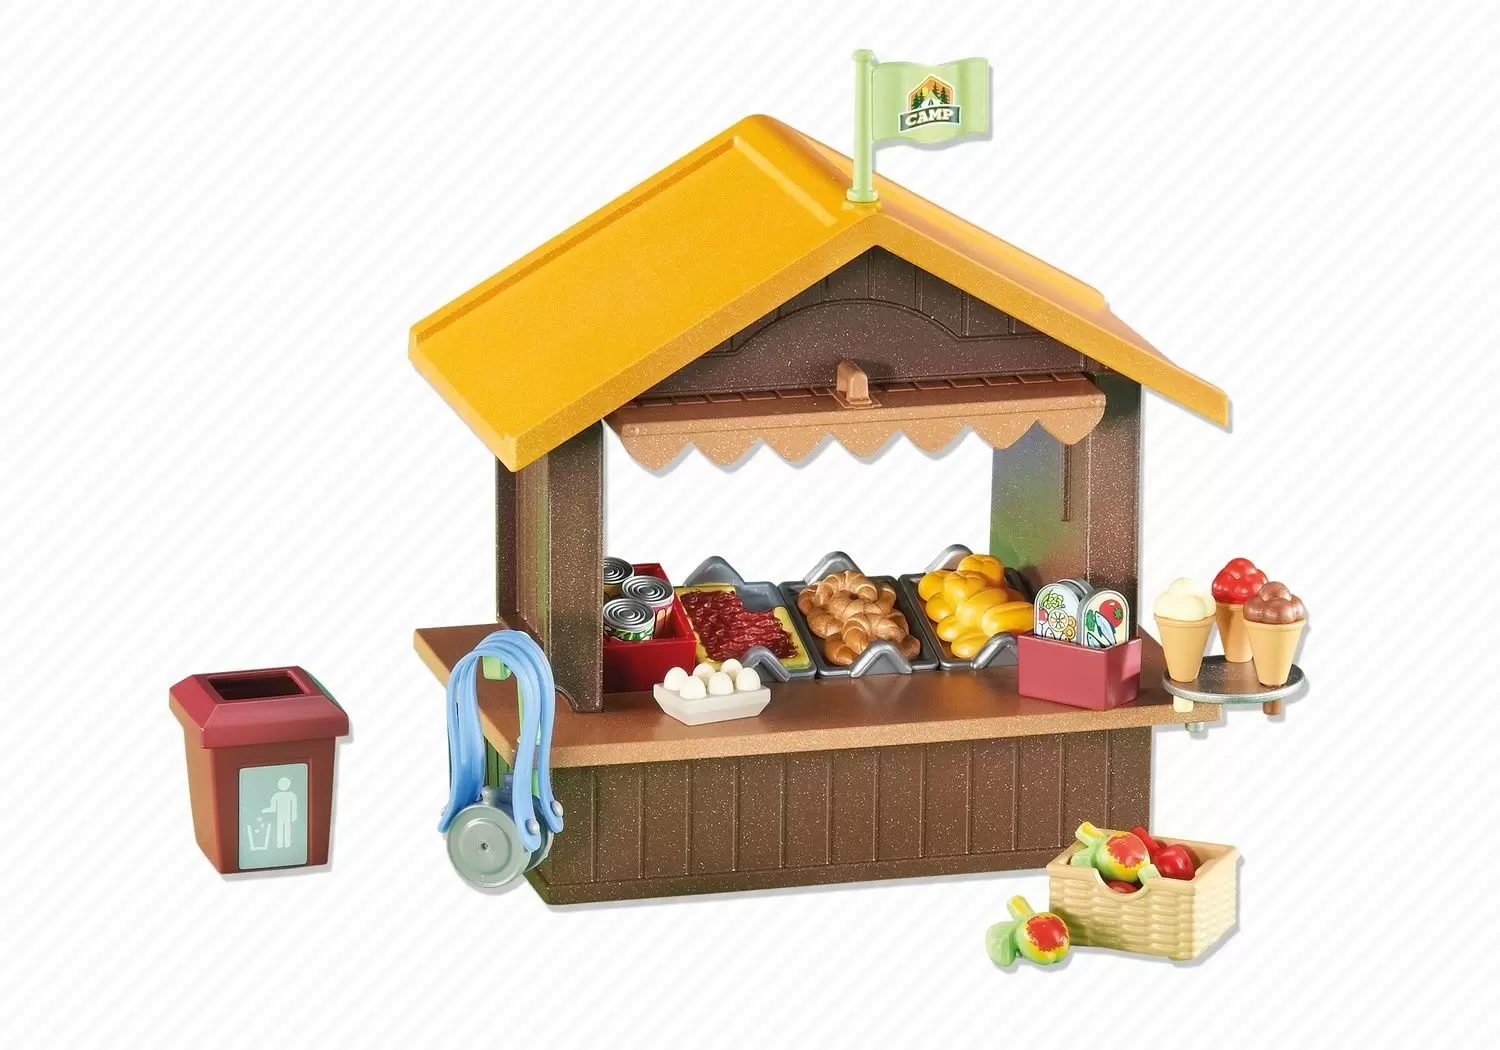 Playmobil Accessories & decorations - Summer Camp Kiosk